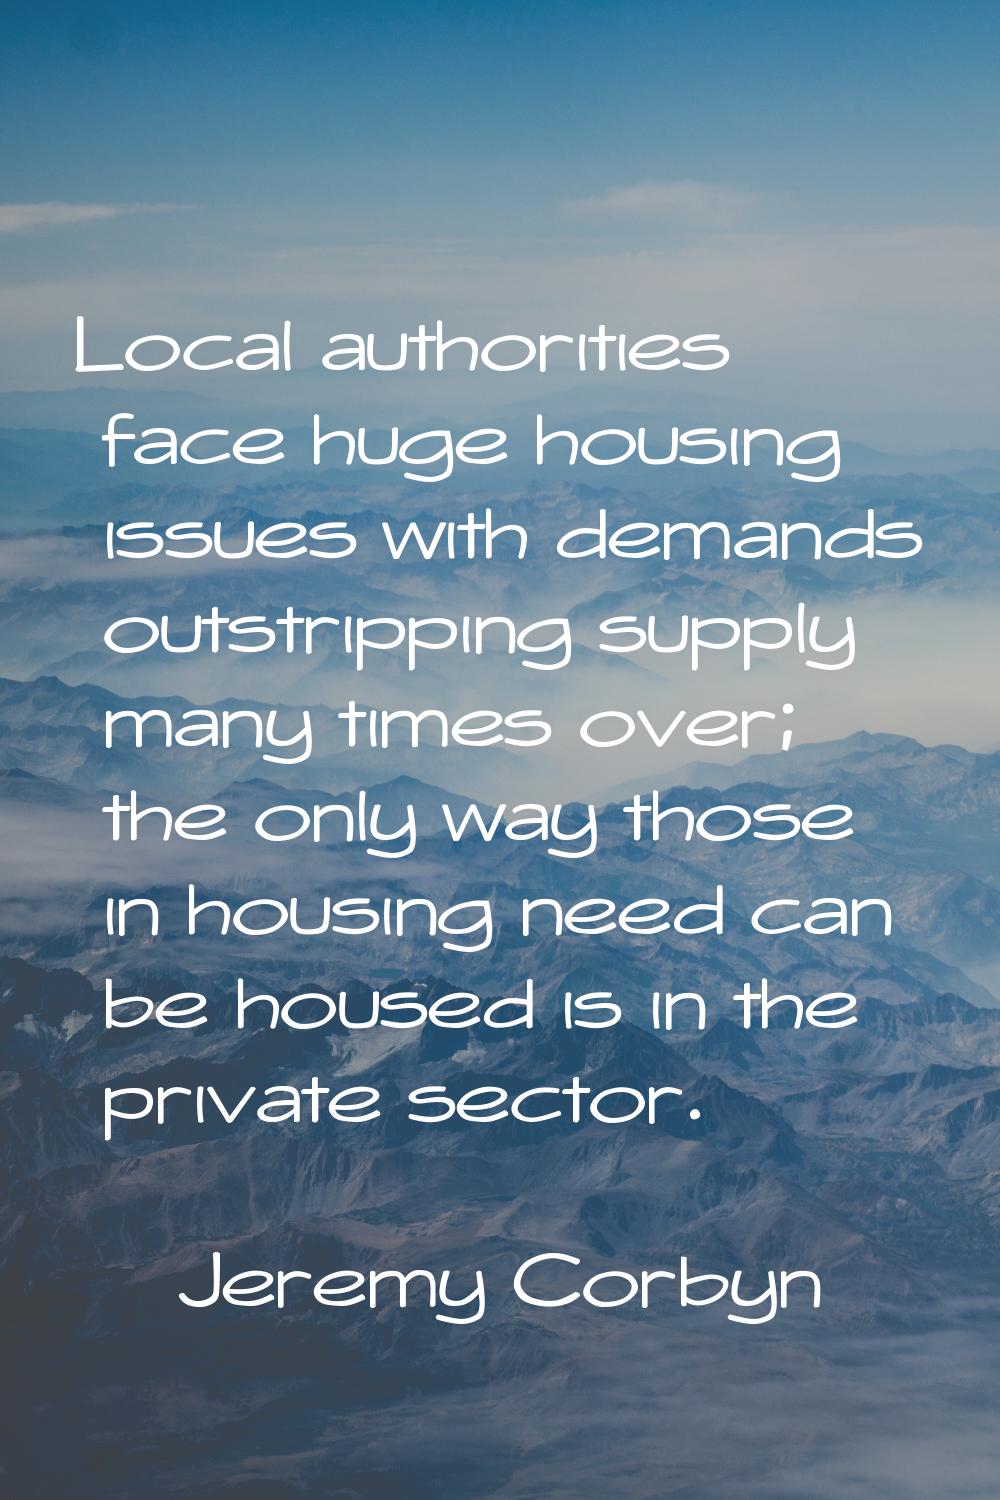 Local authorities face huge housing issues with demands outstripping supply many times over; the on